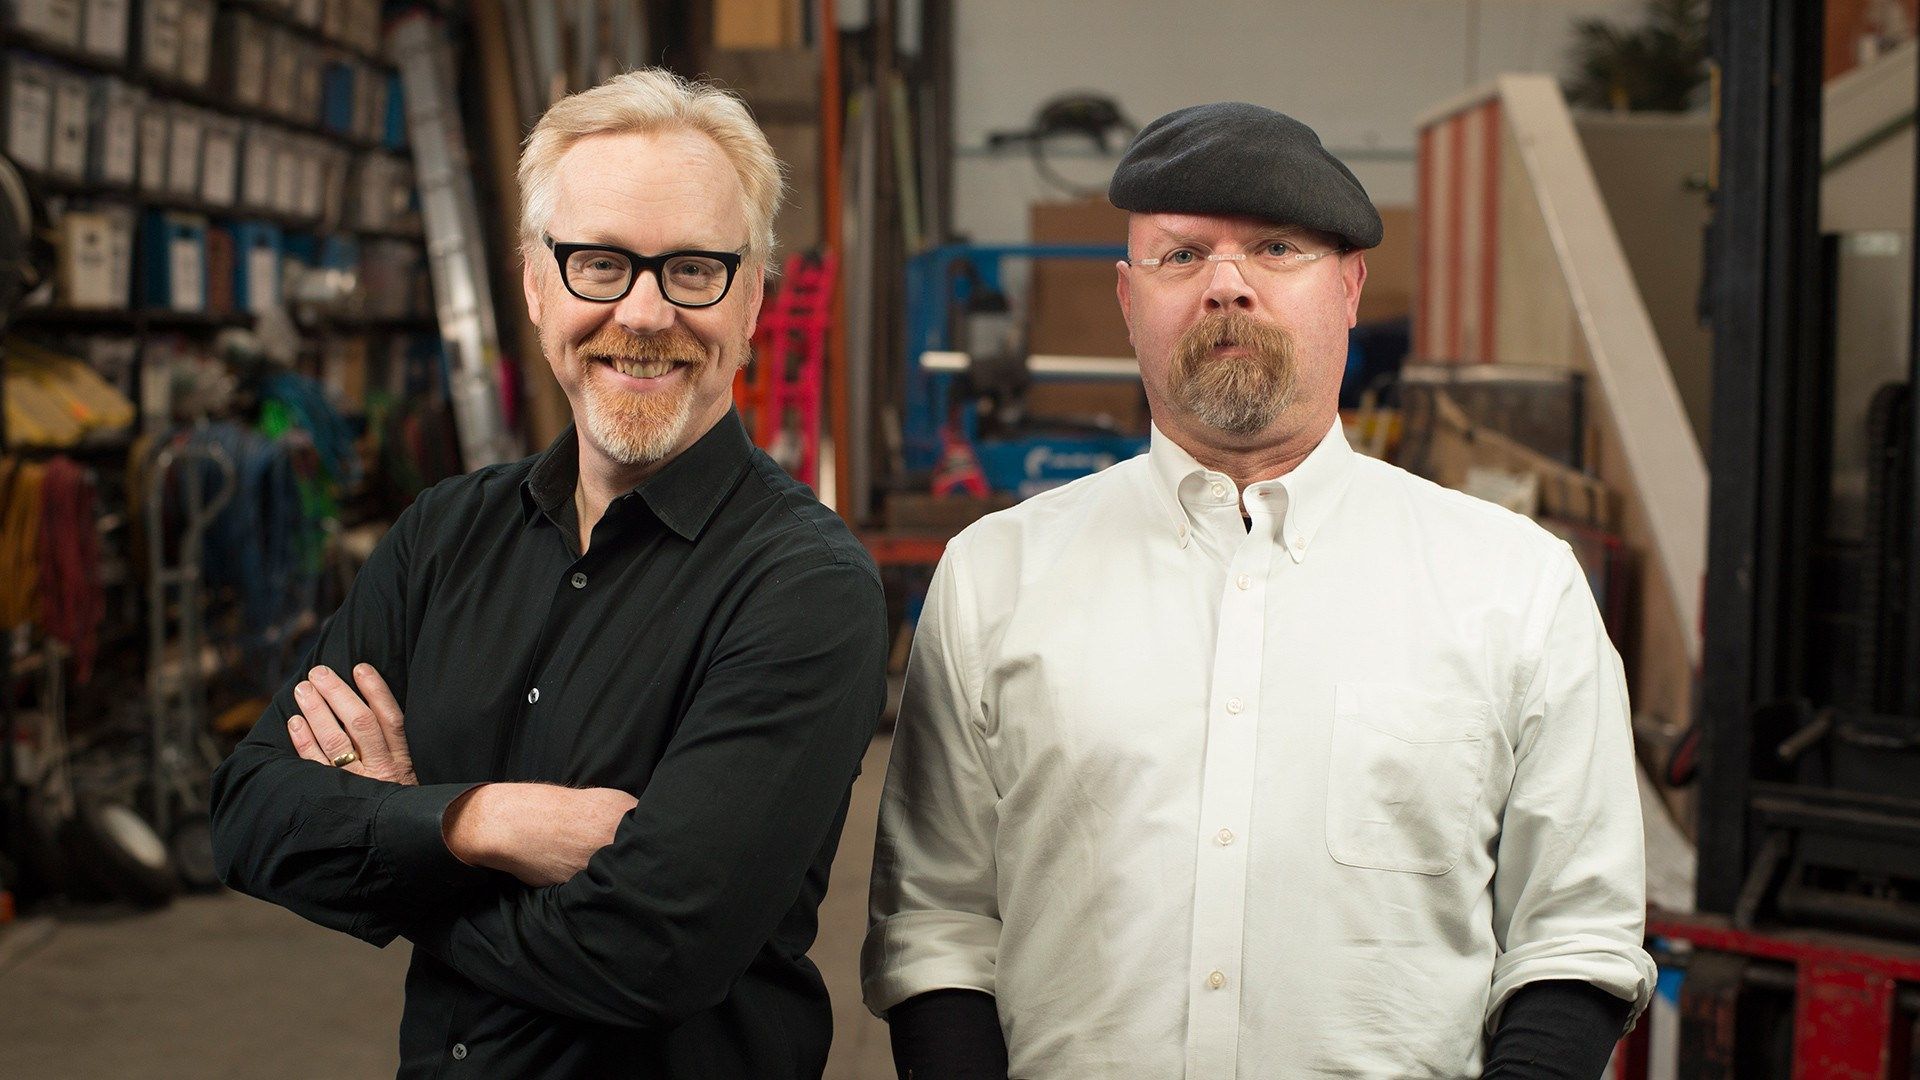 windows wallpaper mythbusters. Myth busters, Episodes, Television show